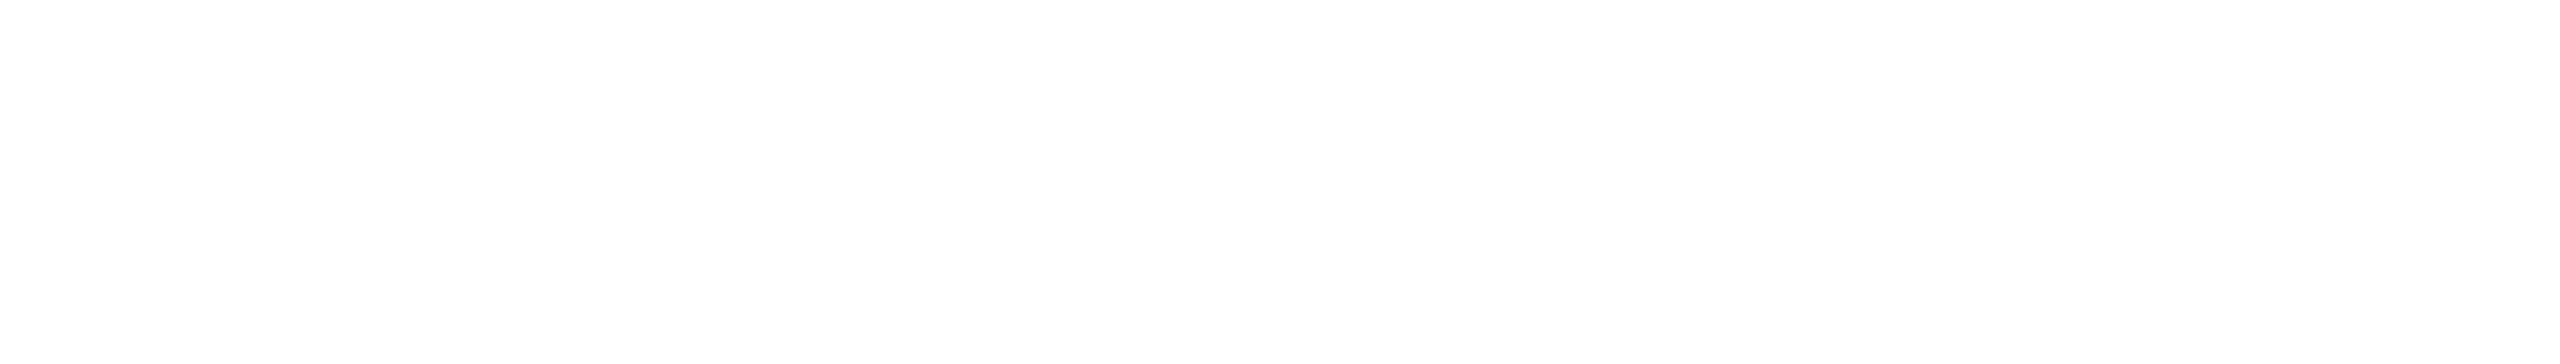 Rivers Risk Consulting Logo Strategic Operational Risk Resiliency